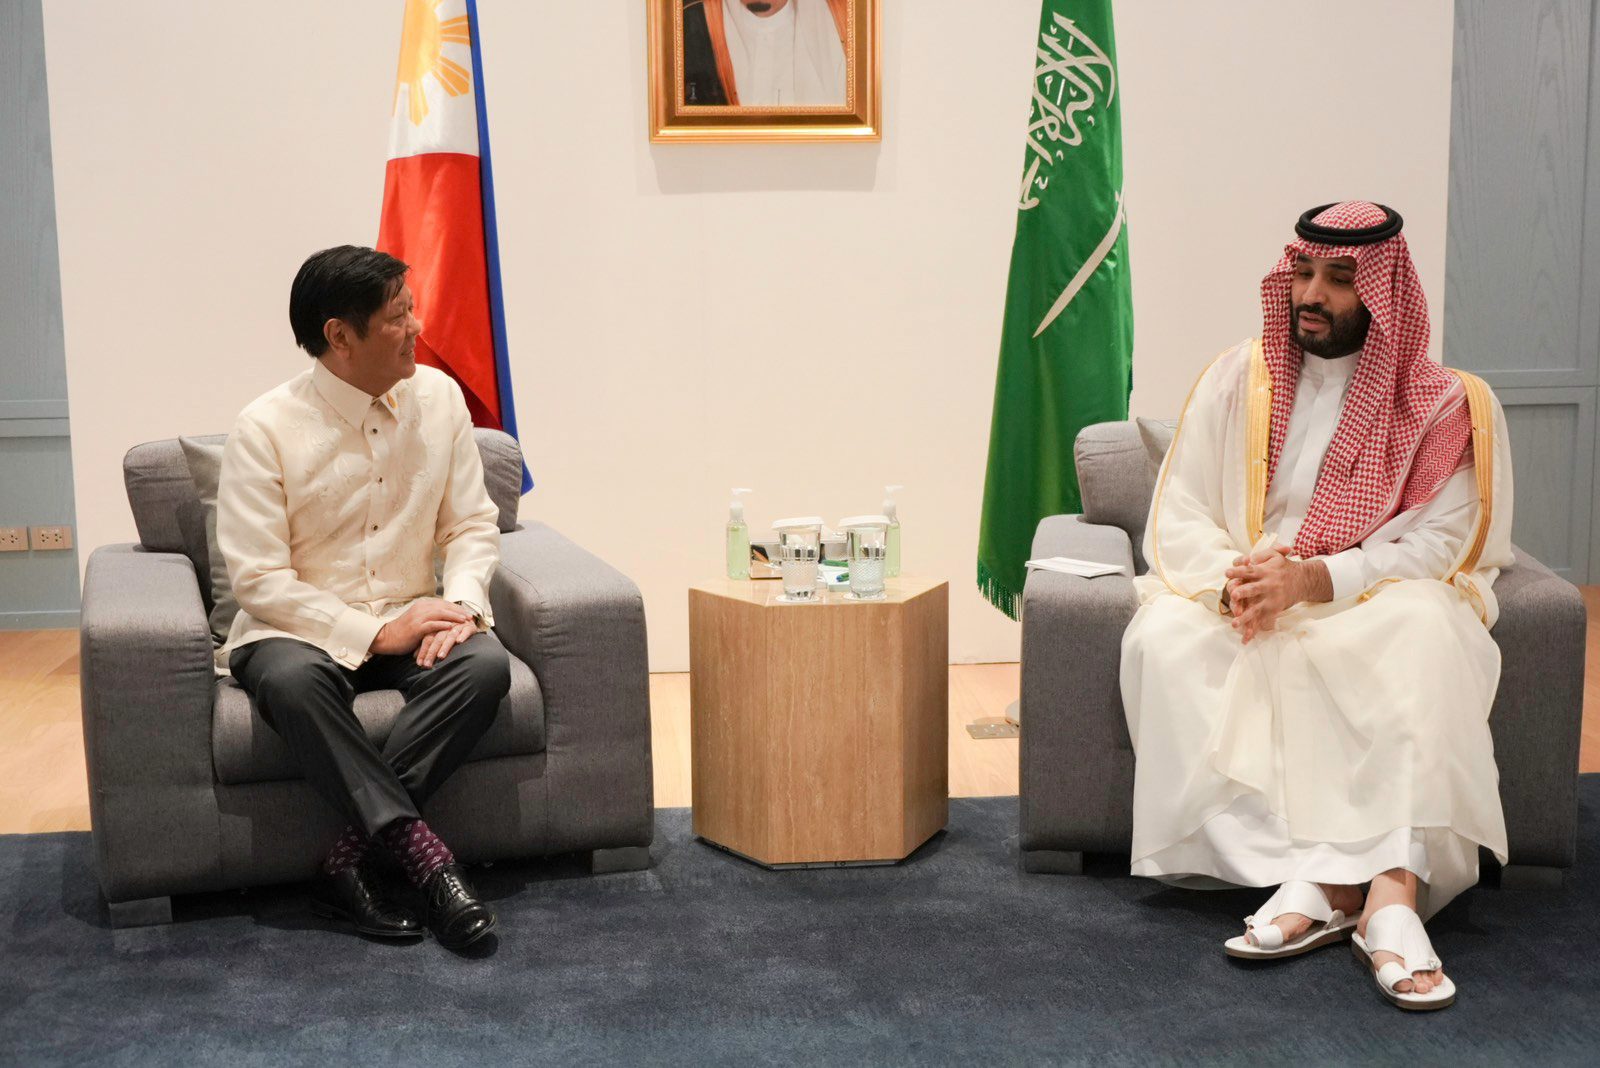 In bilateral with Saudi prince, PH’s labor force made up bulk of discussion